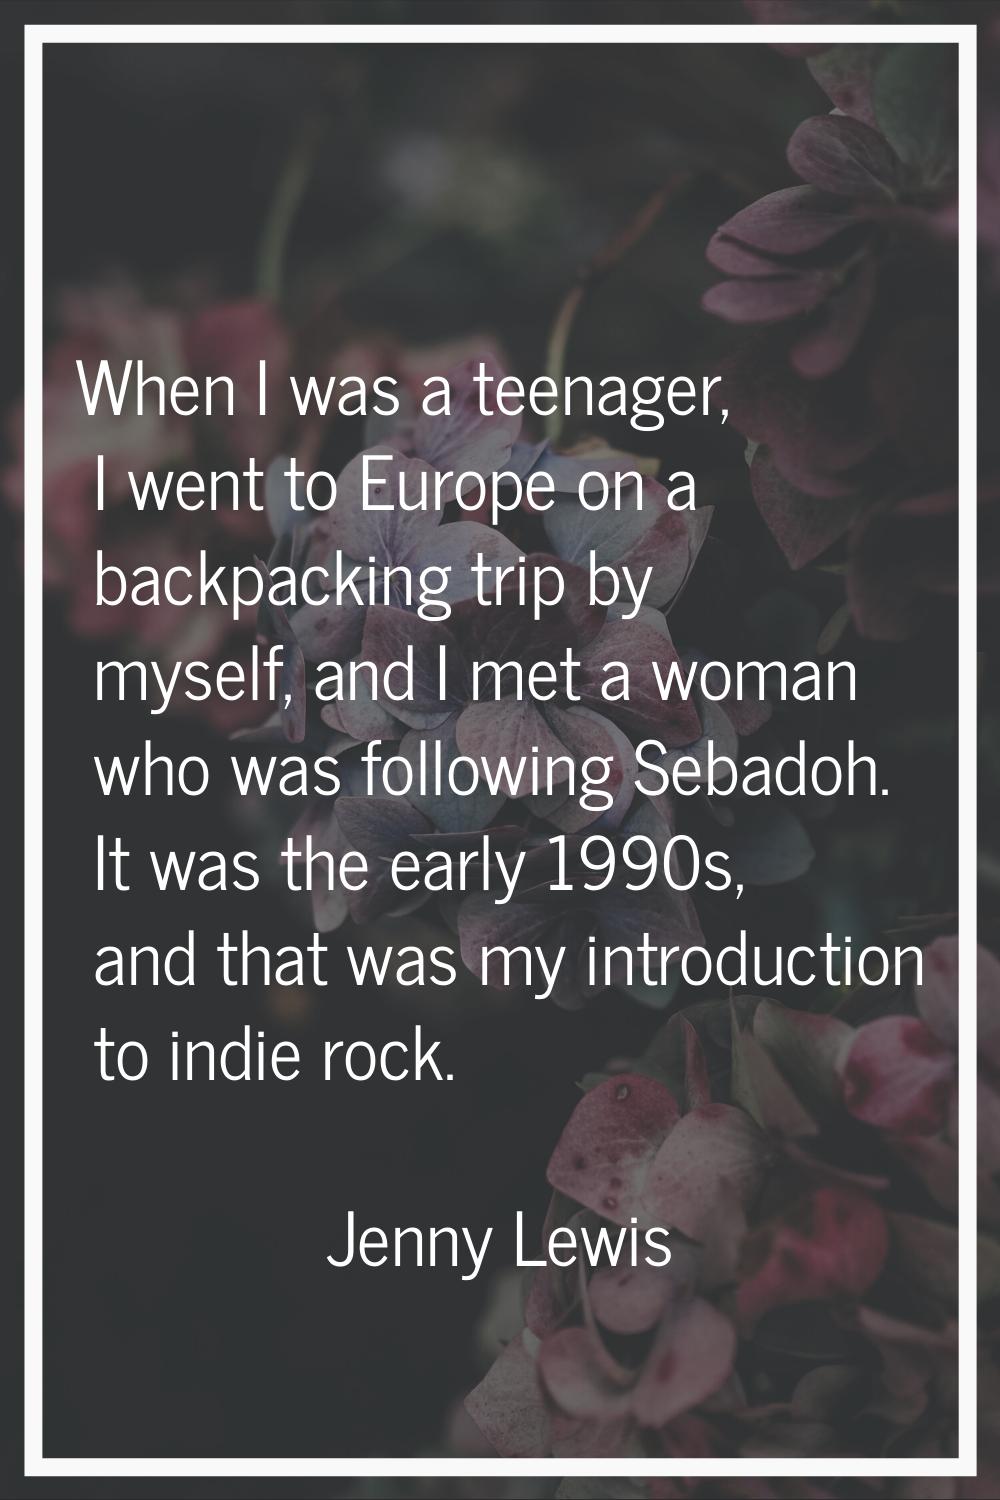 When I was a teenager, I went to Europe on a backpacking trip by myself, and I met a woman who was 